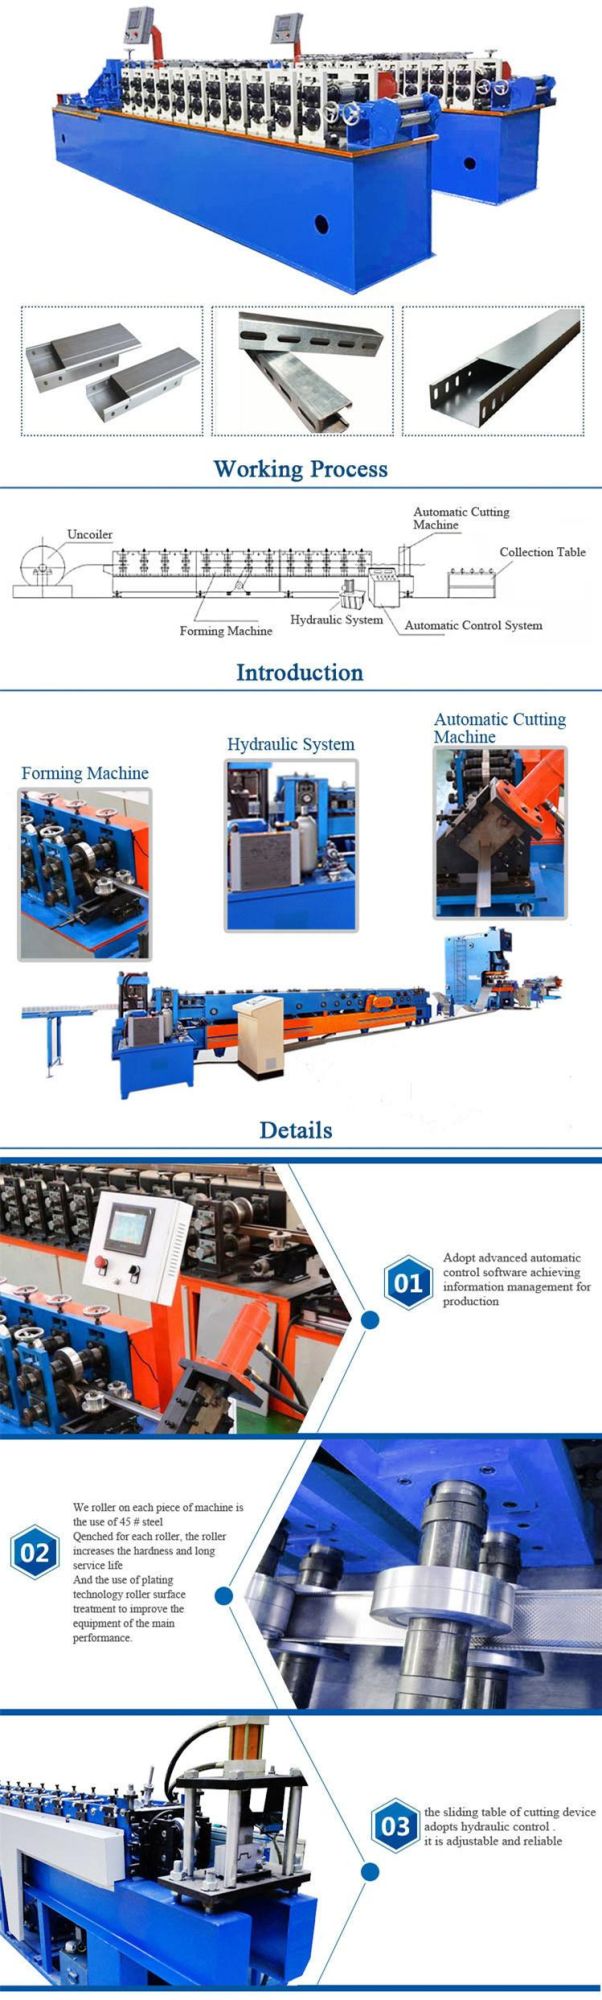 Customized Product High Efficiency Cable Tray Roll Forming Machine